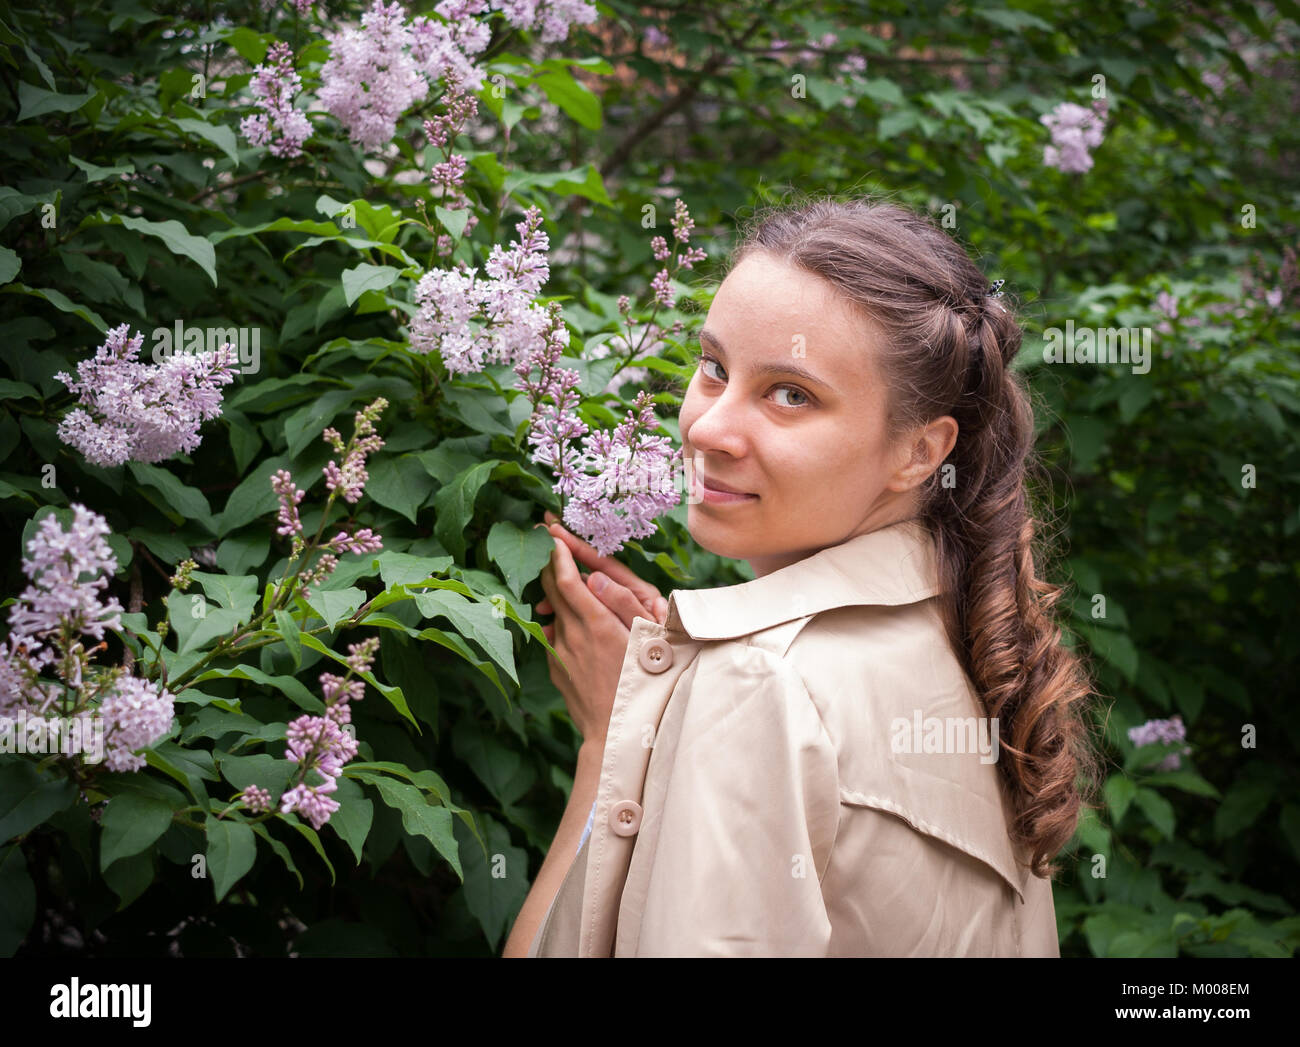 Young girl is standing near a blooming lilac bush and looking at camera. Stock Photo